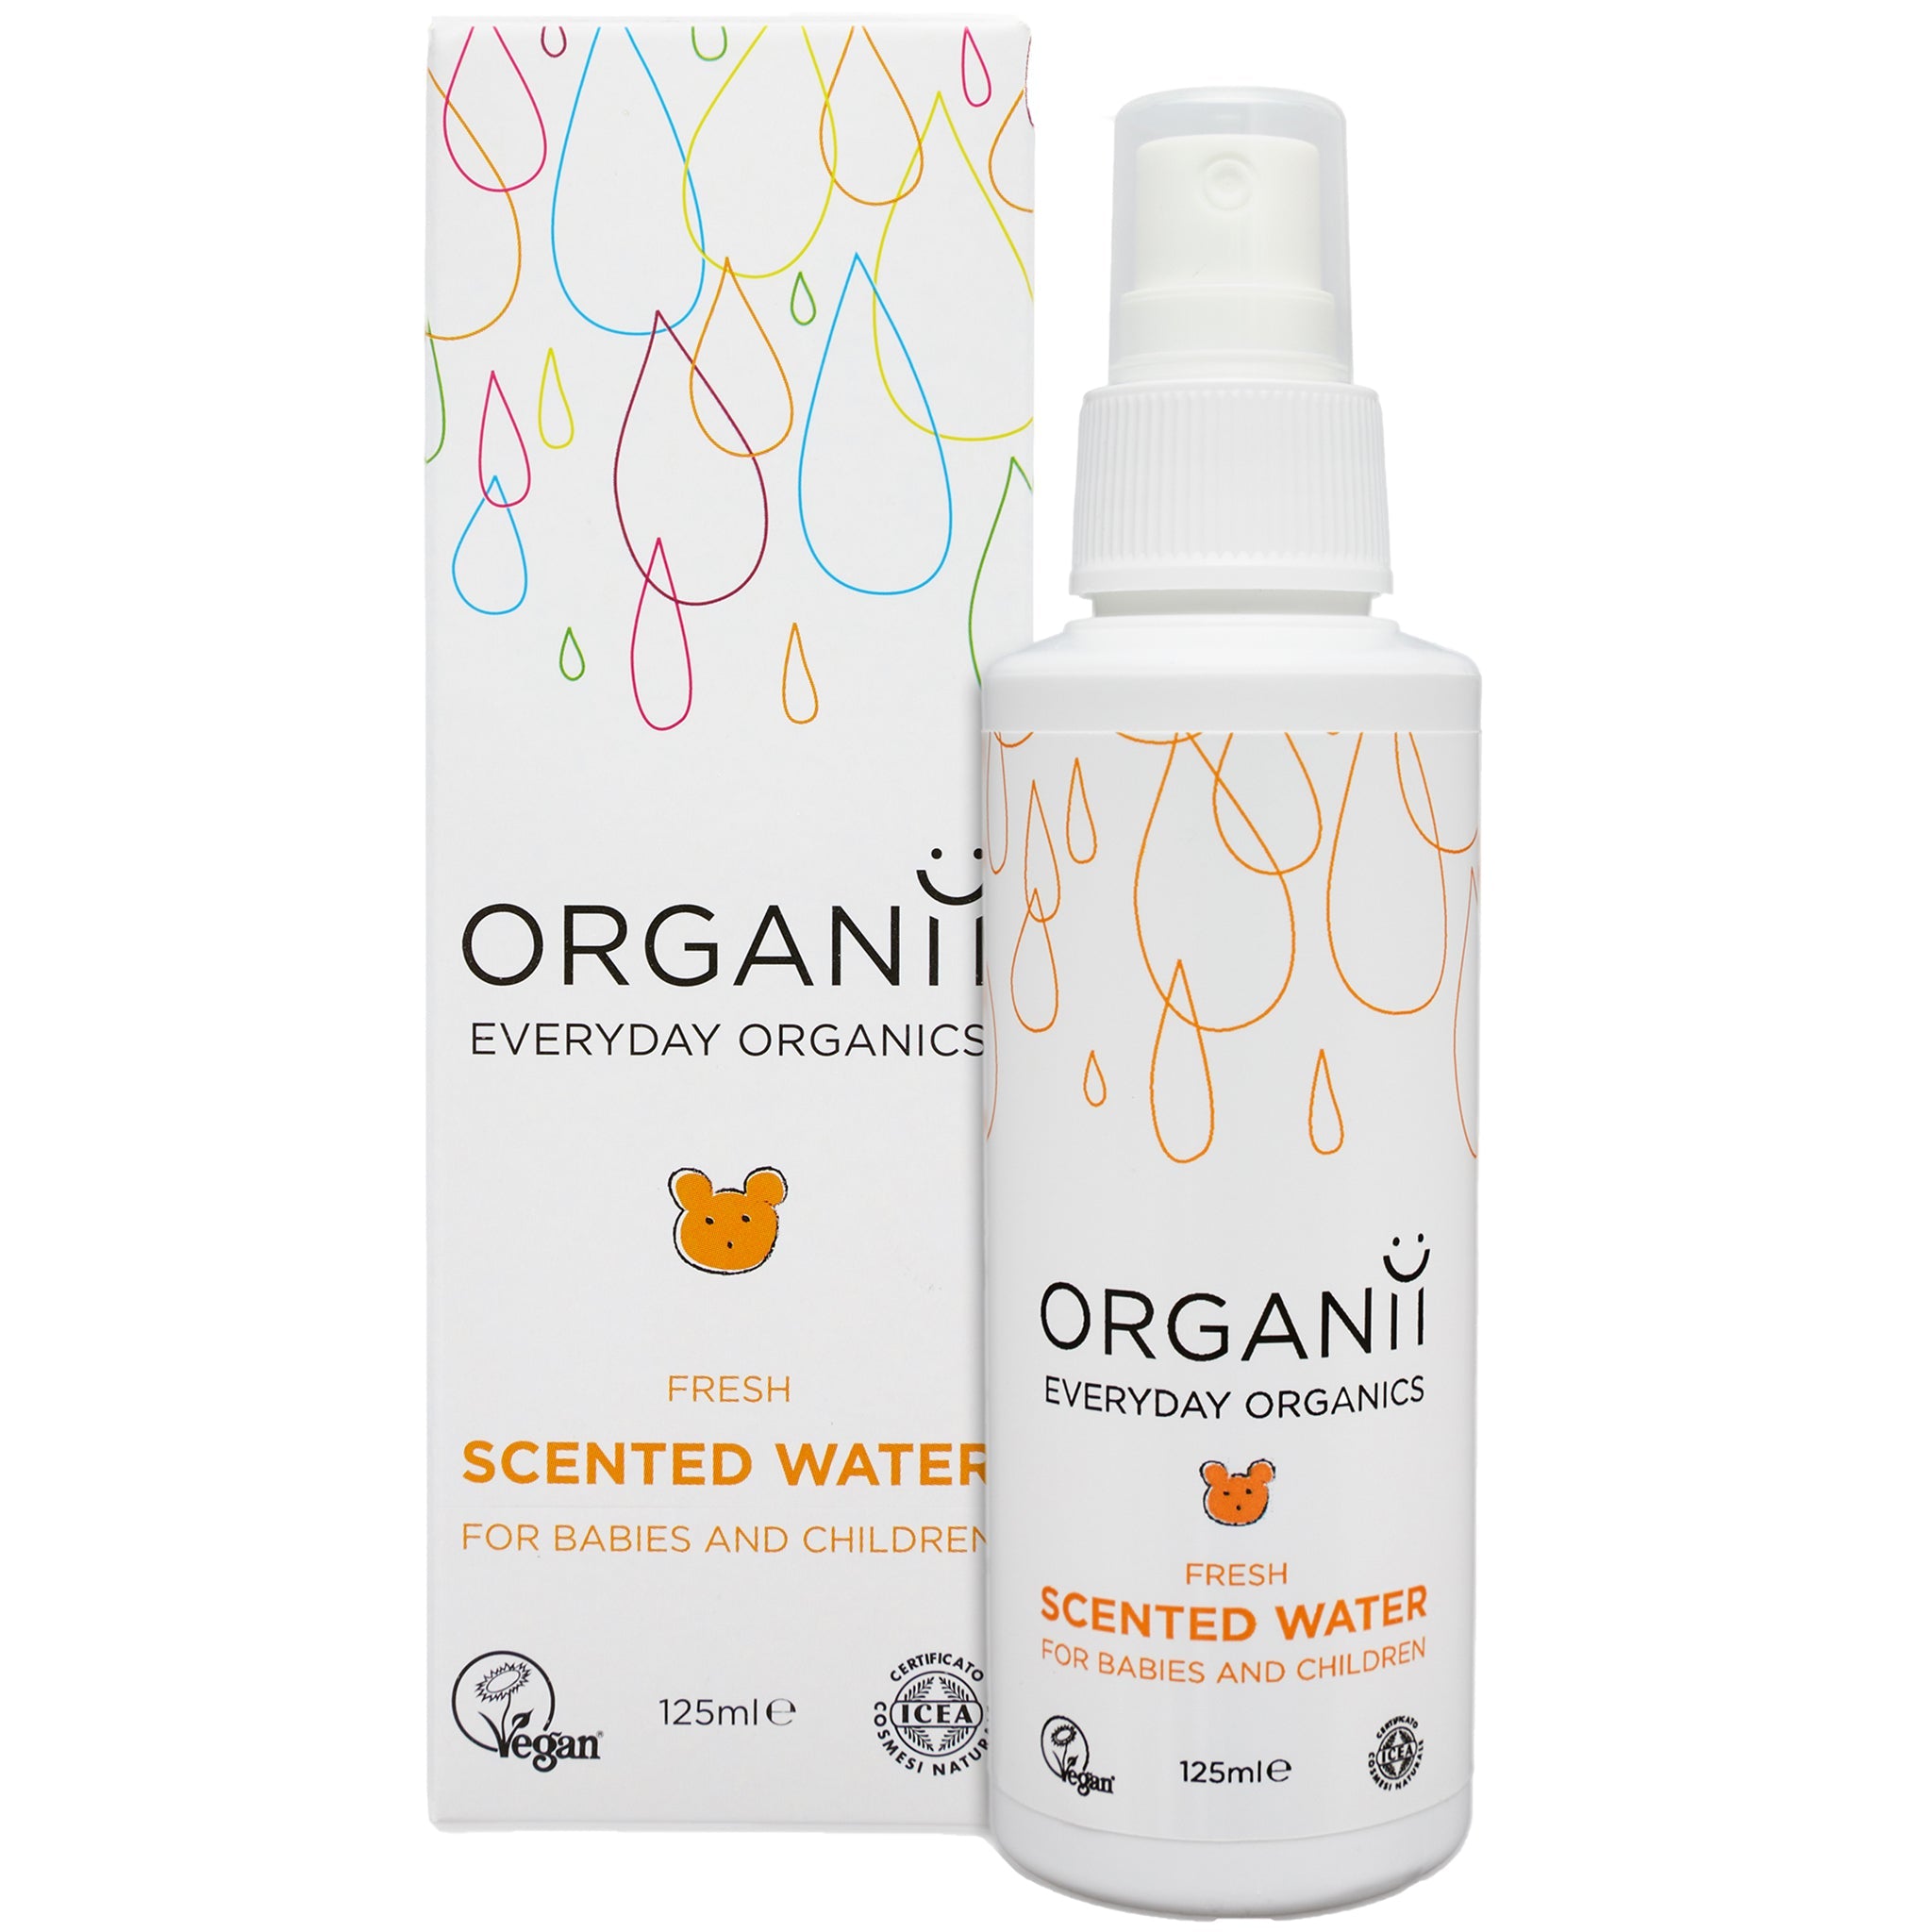 Fresh Scented Water - mypure.co.uk